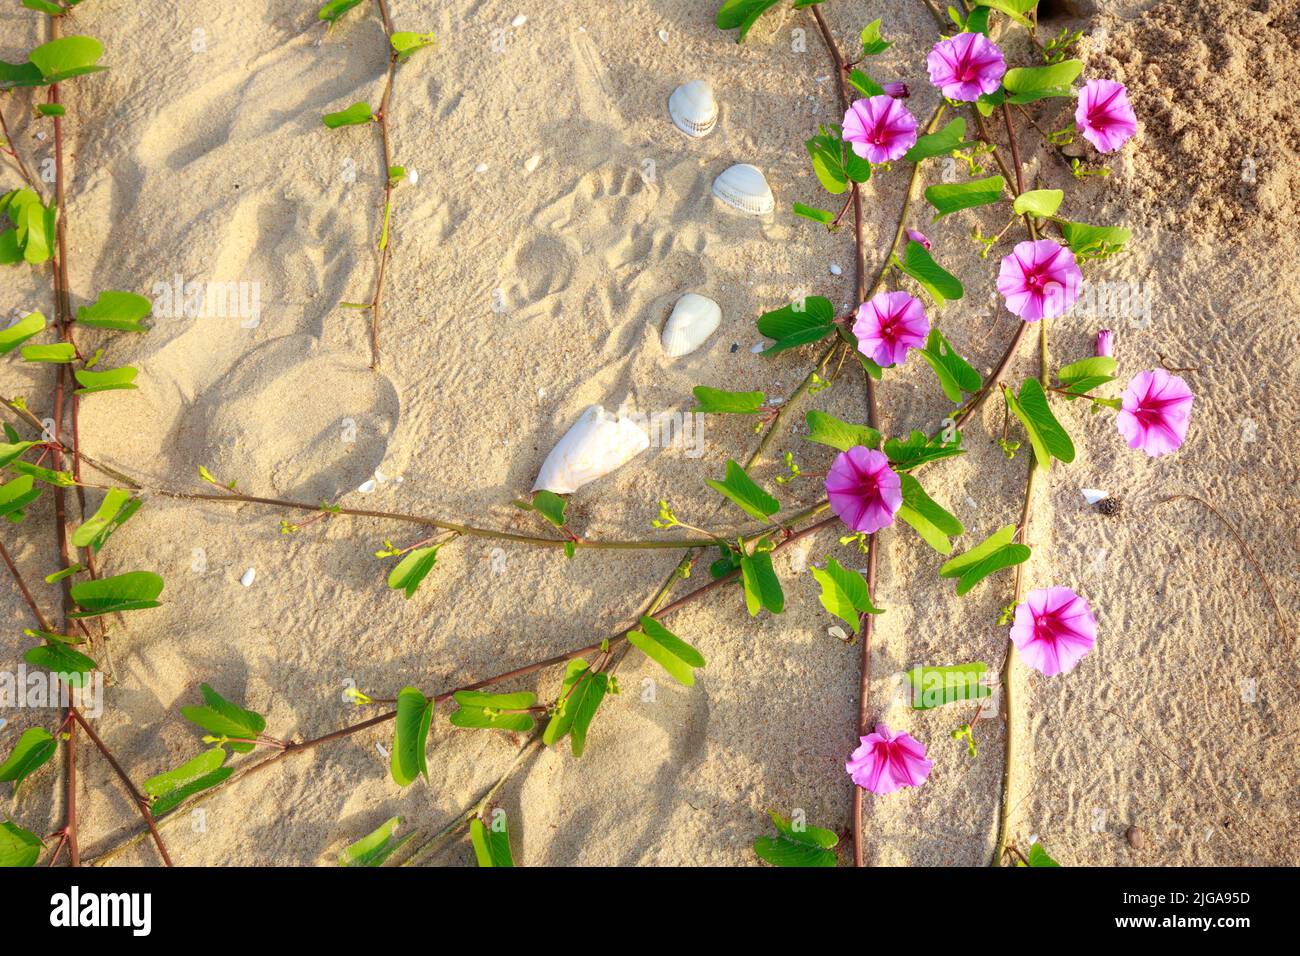 Water spinach flowers on the beach Stock Photo